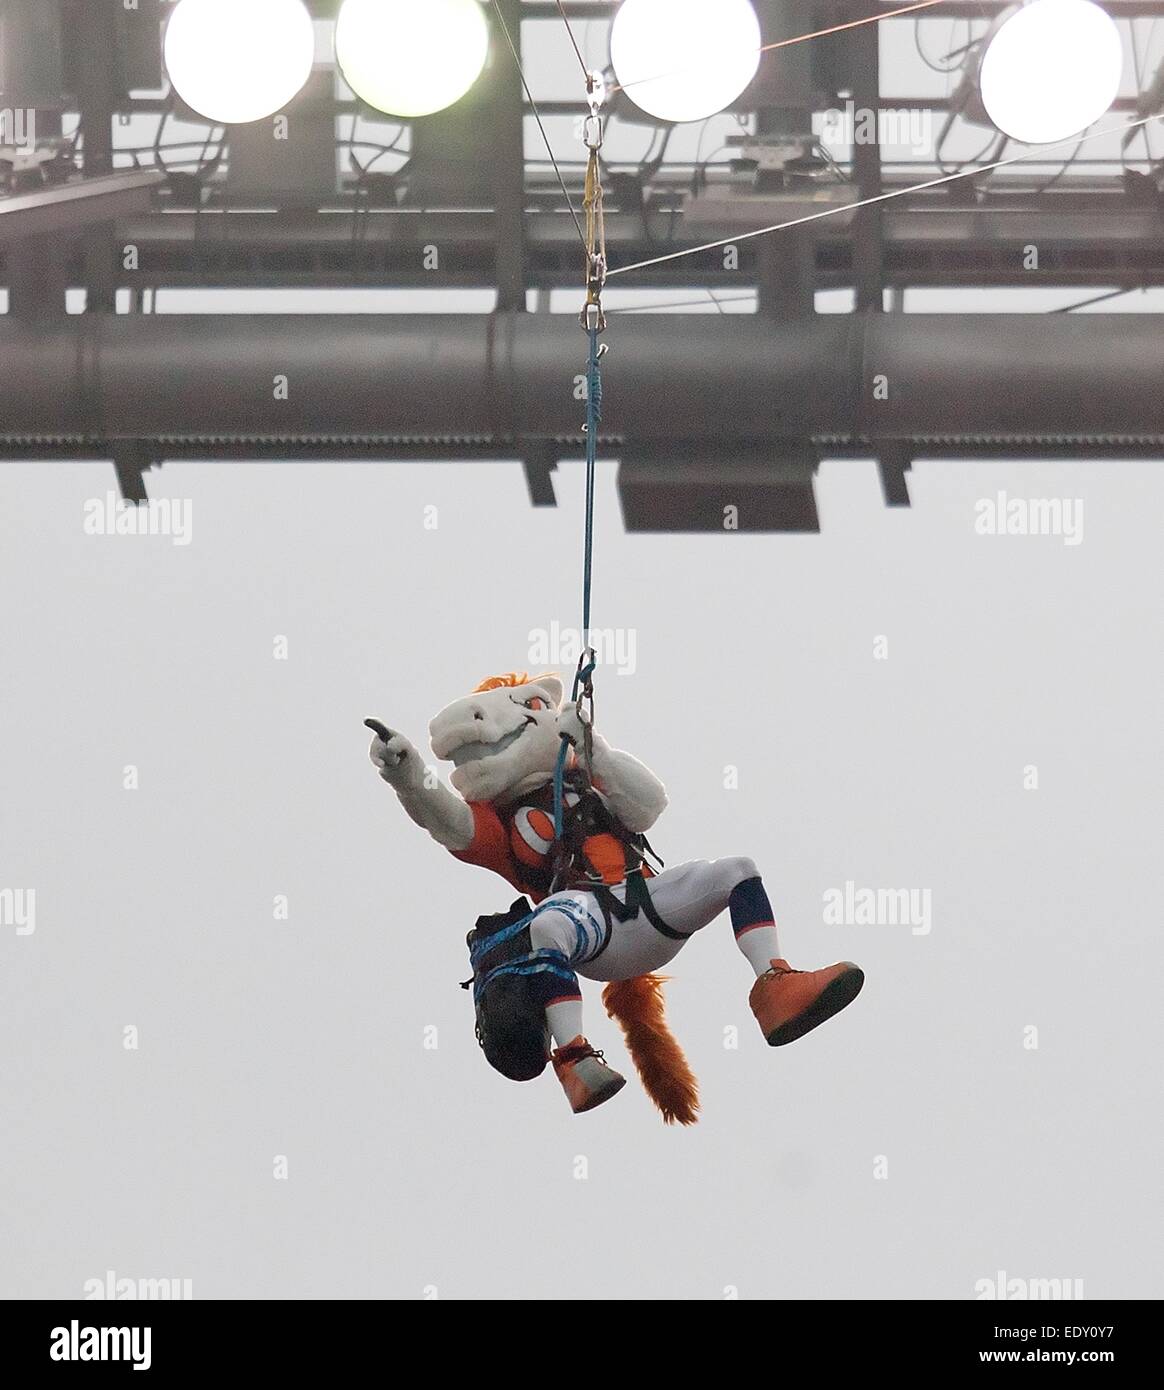 Denver, Colorado, USA. 11th Jan, 2015. Broncos Mascot Miles zip lines on to the field at the start of the game during the 1st. Half at Sports Authority Field at Mile High Sunday afternoon. The Colts beat the Broncos 24-13. Credit:  Hector Acevedo/ZUMA Wire/Alamy Live News Stock Photo